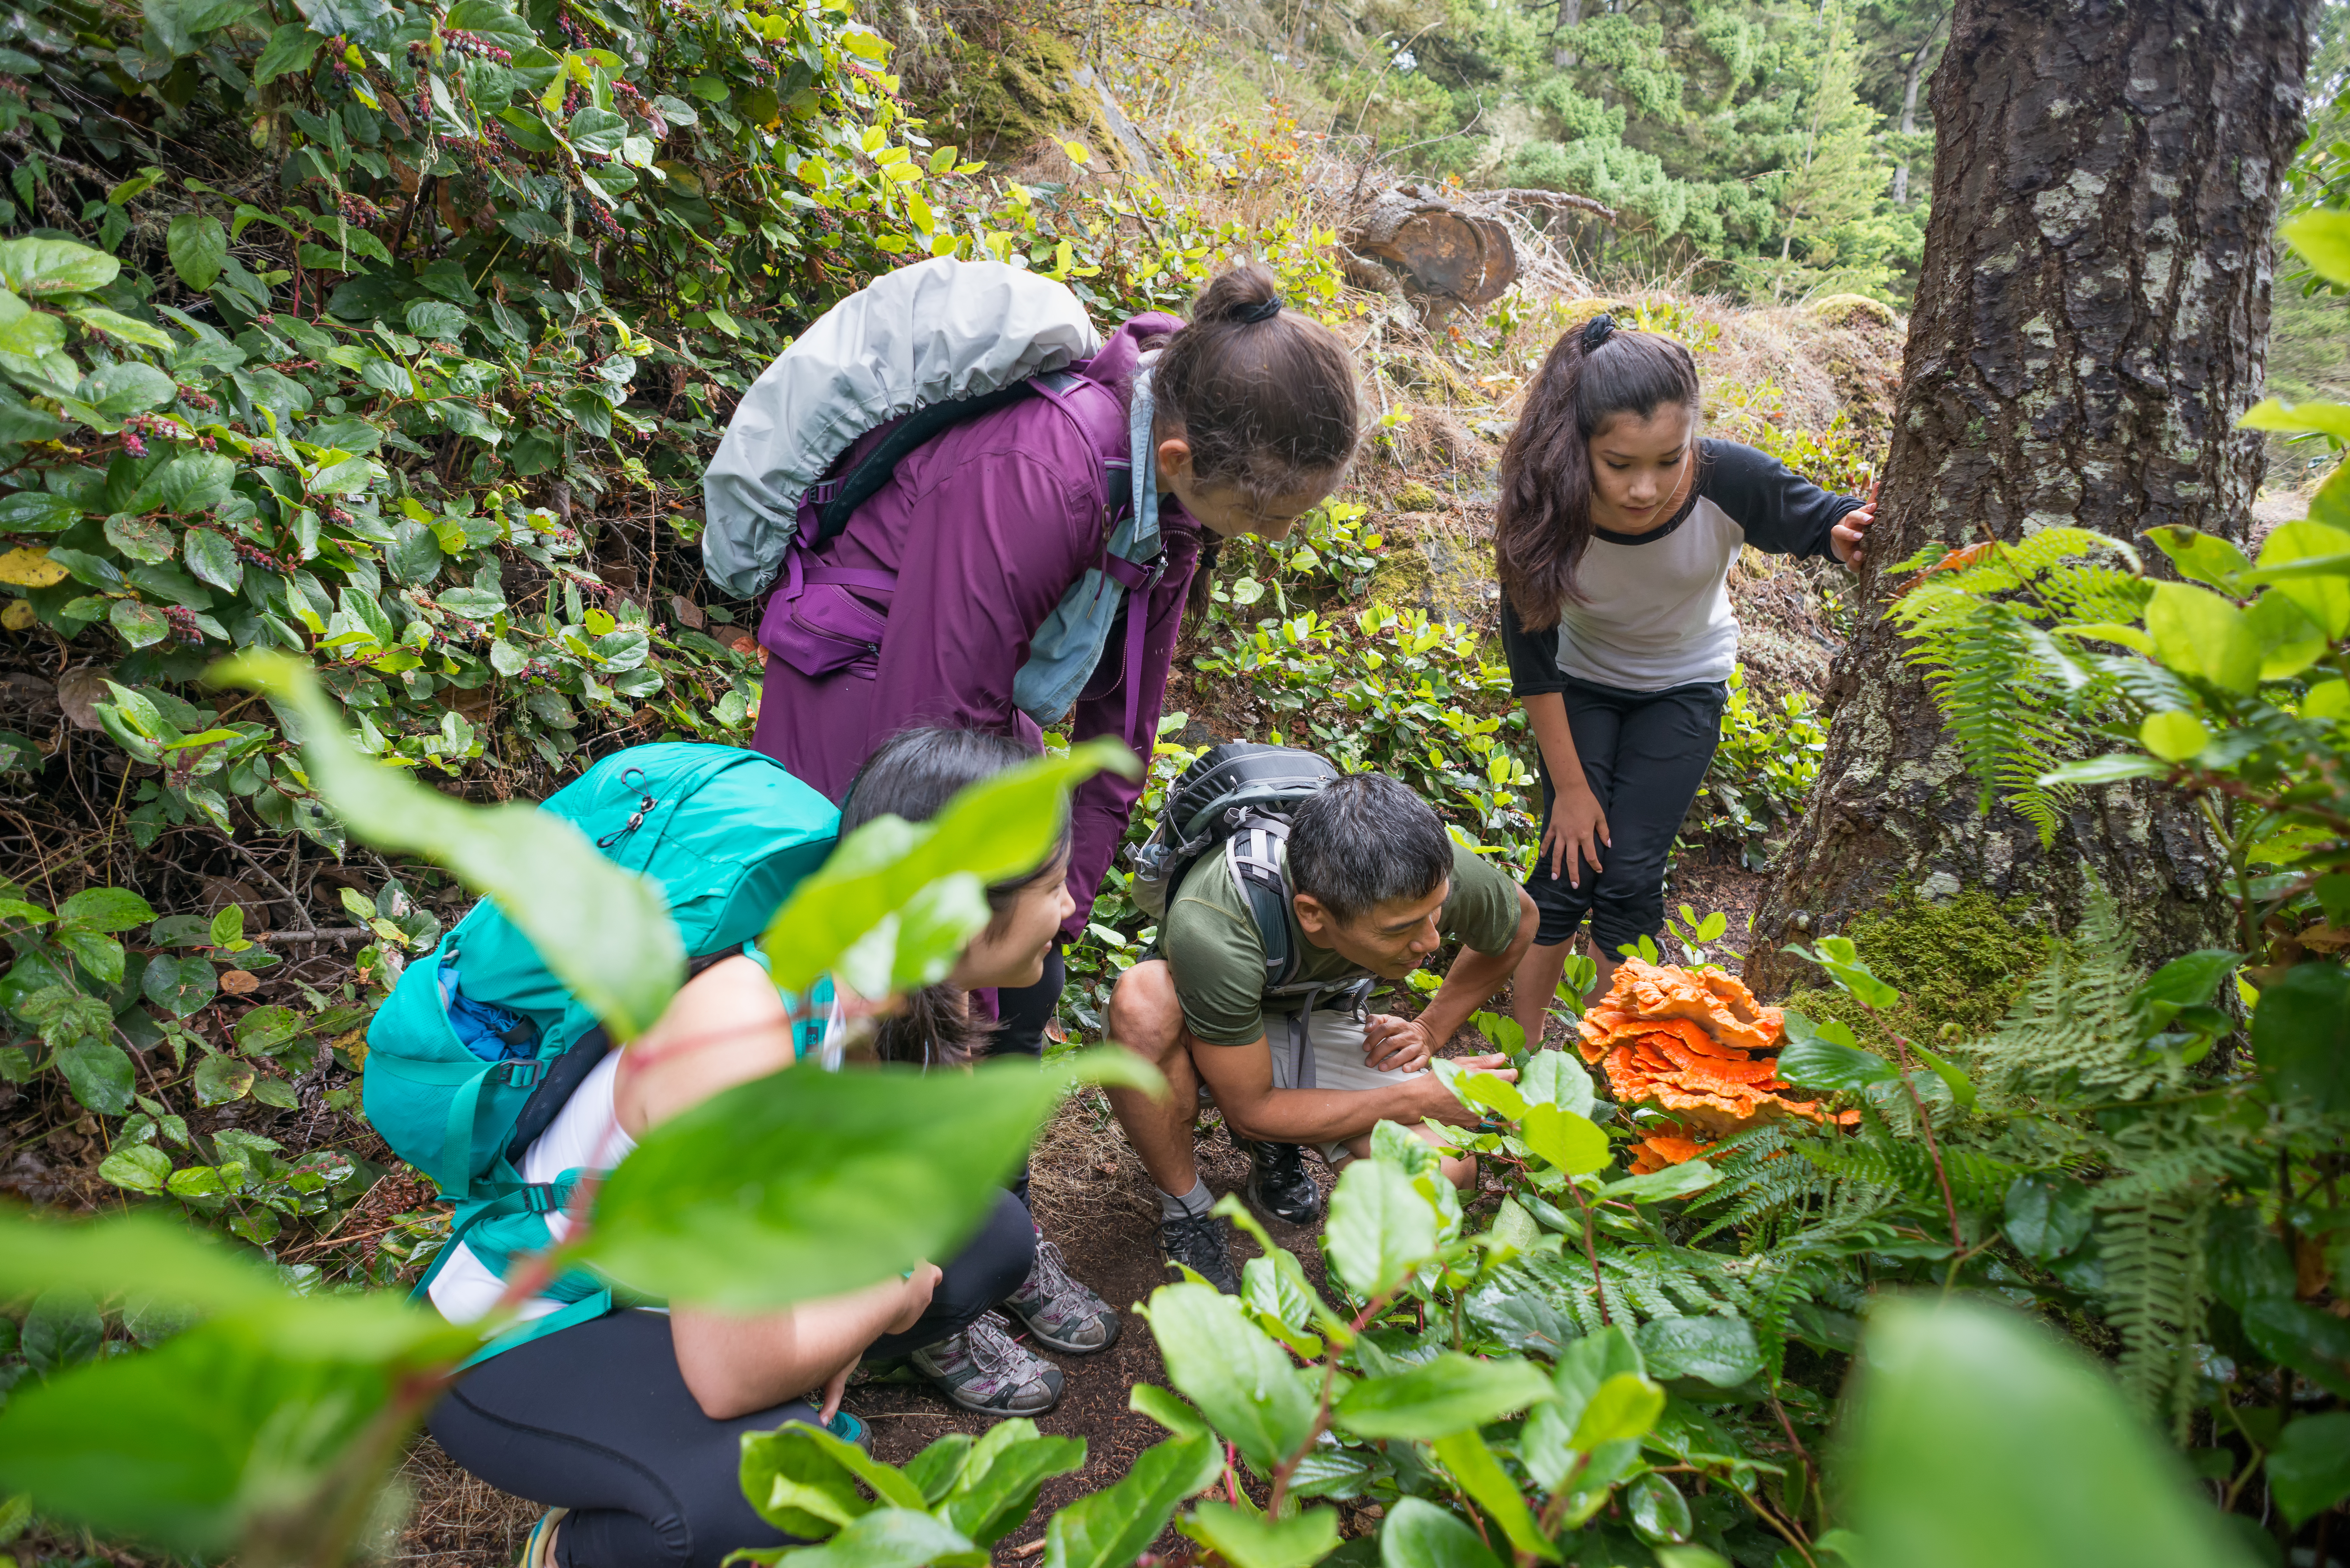 Backpackers Examine an Edible Orange Mushroom while Hiking Through Forest